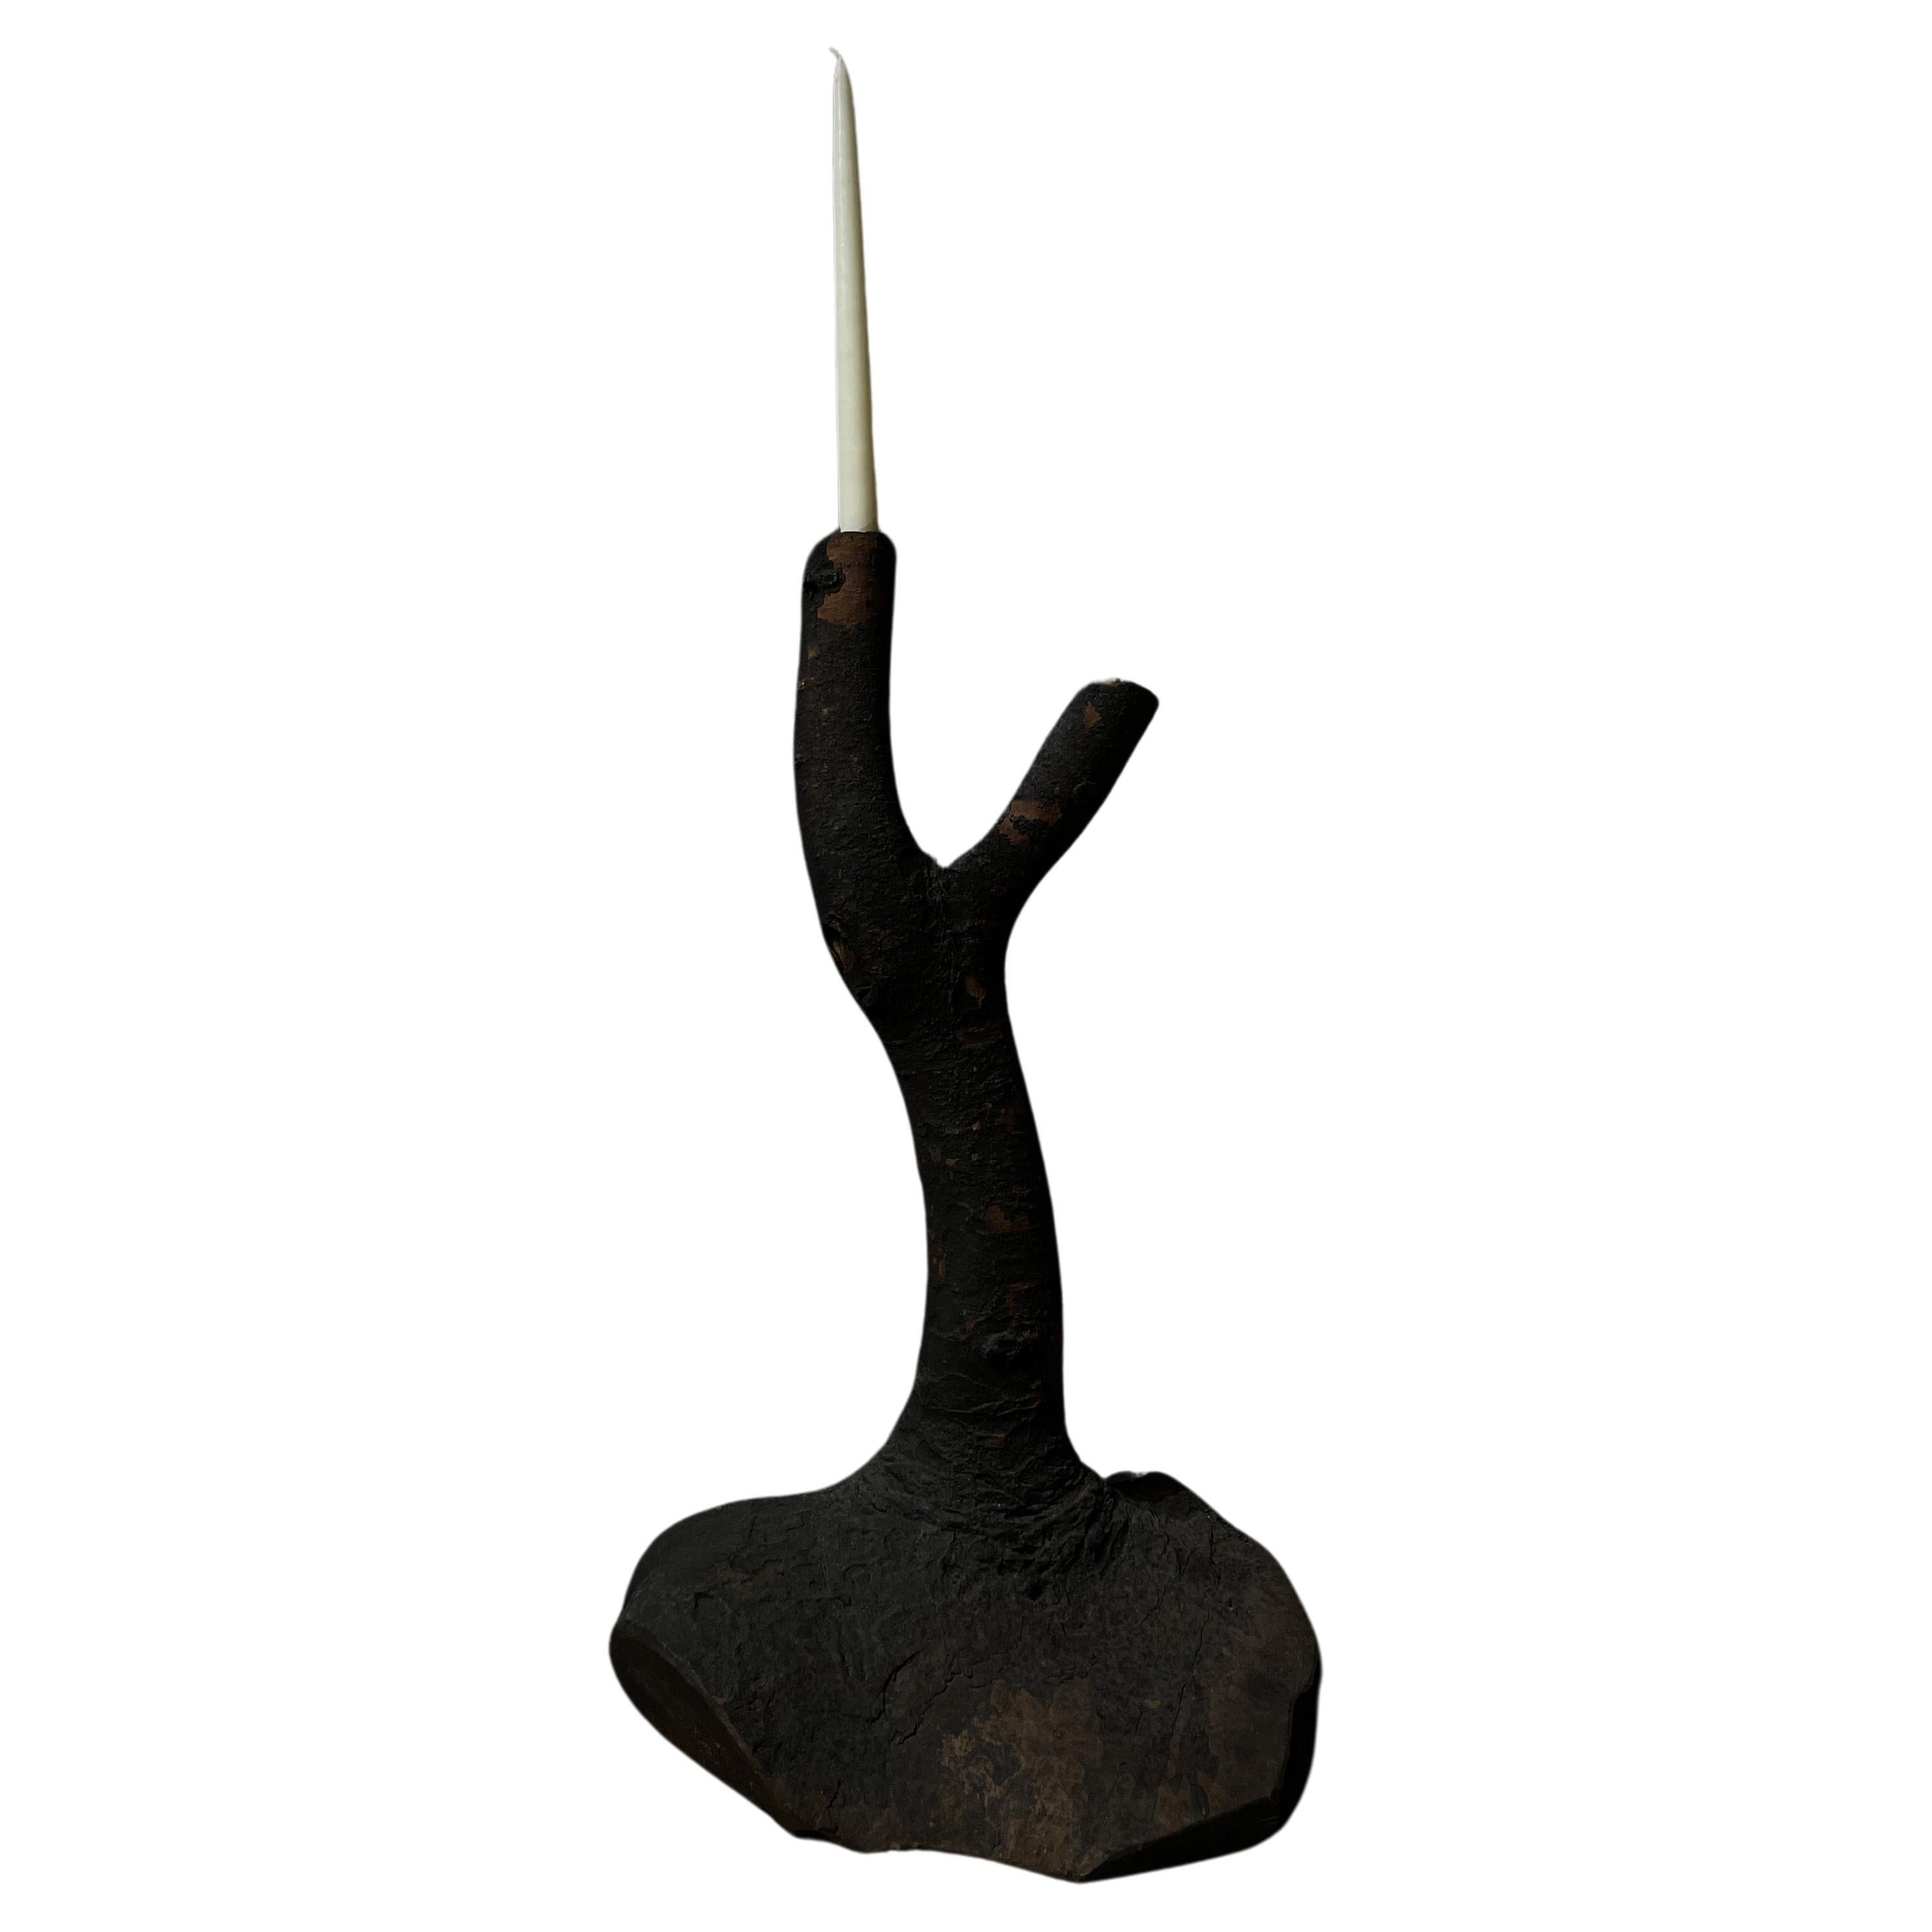 This antique charred wooden branch candle holder is recovered from an old fallen tree. It comes from an old traditional Japanese home with an Irori. An irori is a sunken fireplace in a center of a home. It is used to heat the home and for cooking.